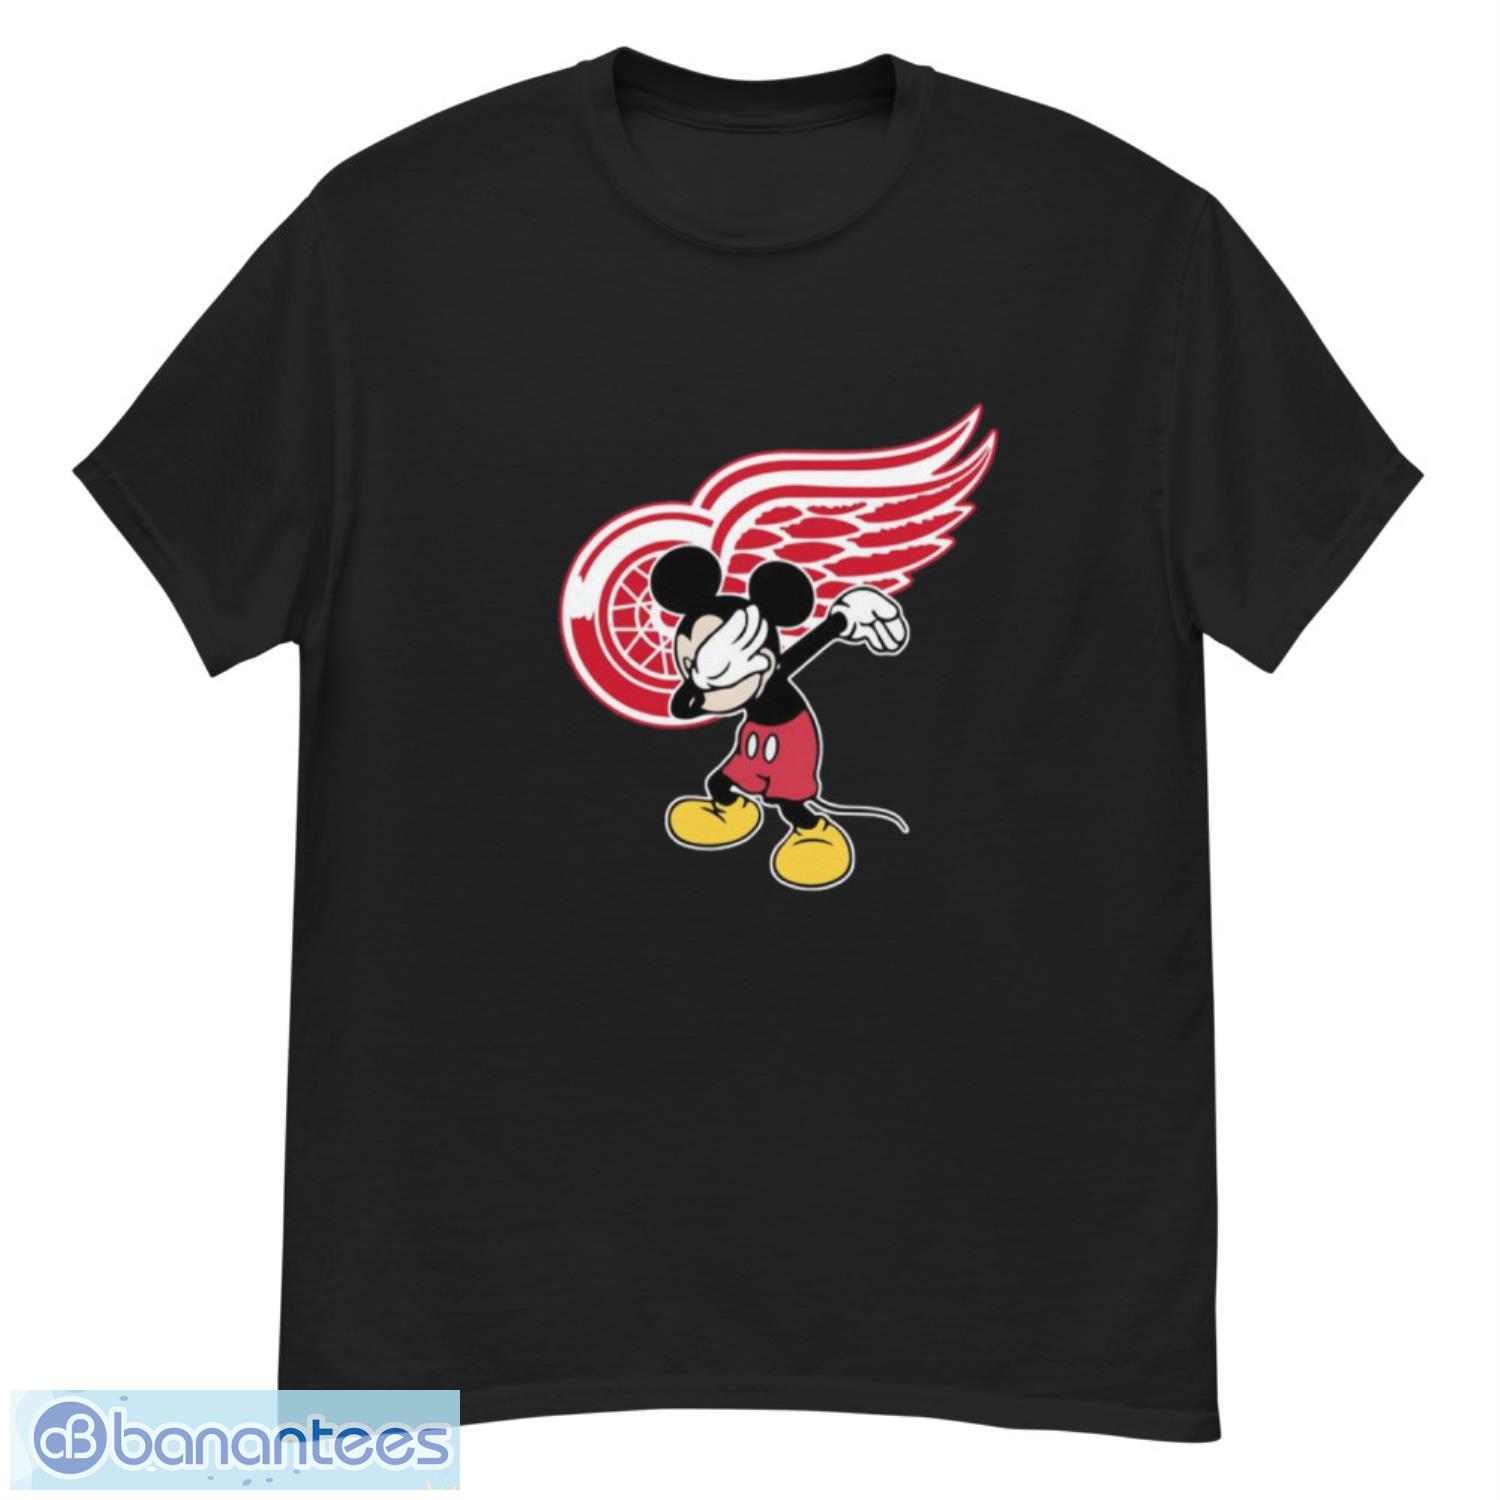 Detroit Red Wings T-shirt 3D cartoon graphic gift for fan -Jack